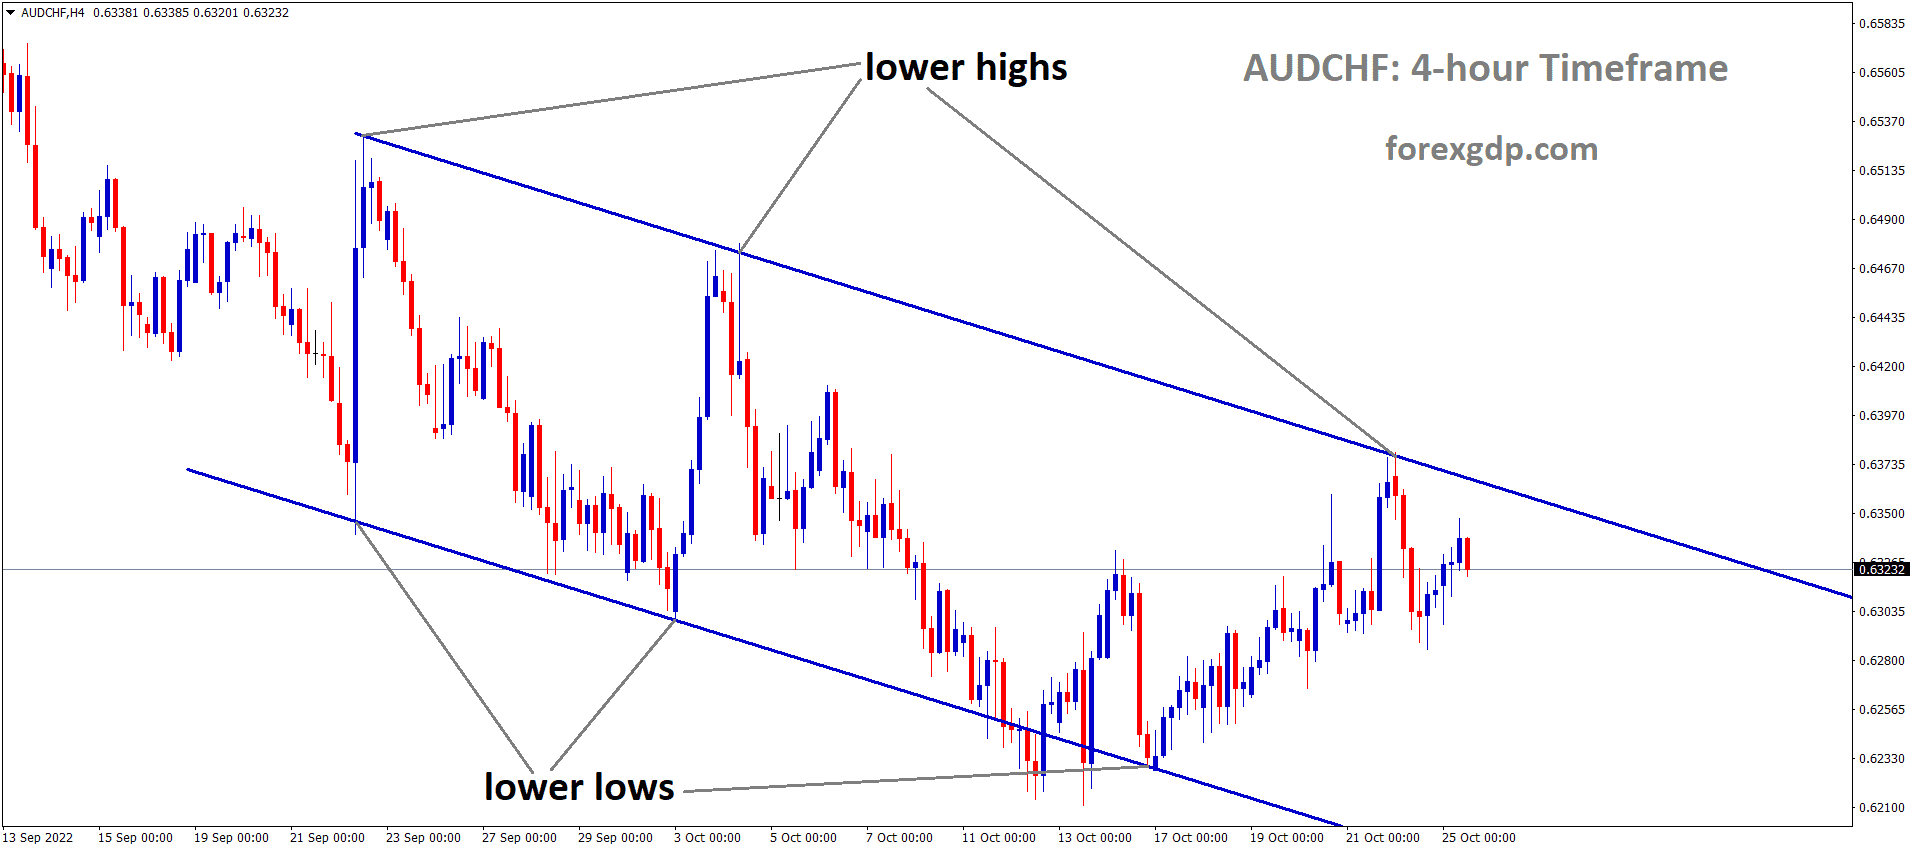 AUDCHF is moving in the Descending channel and the market has fallen from the lower high area of the channel 1